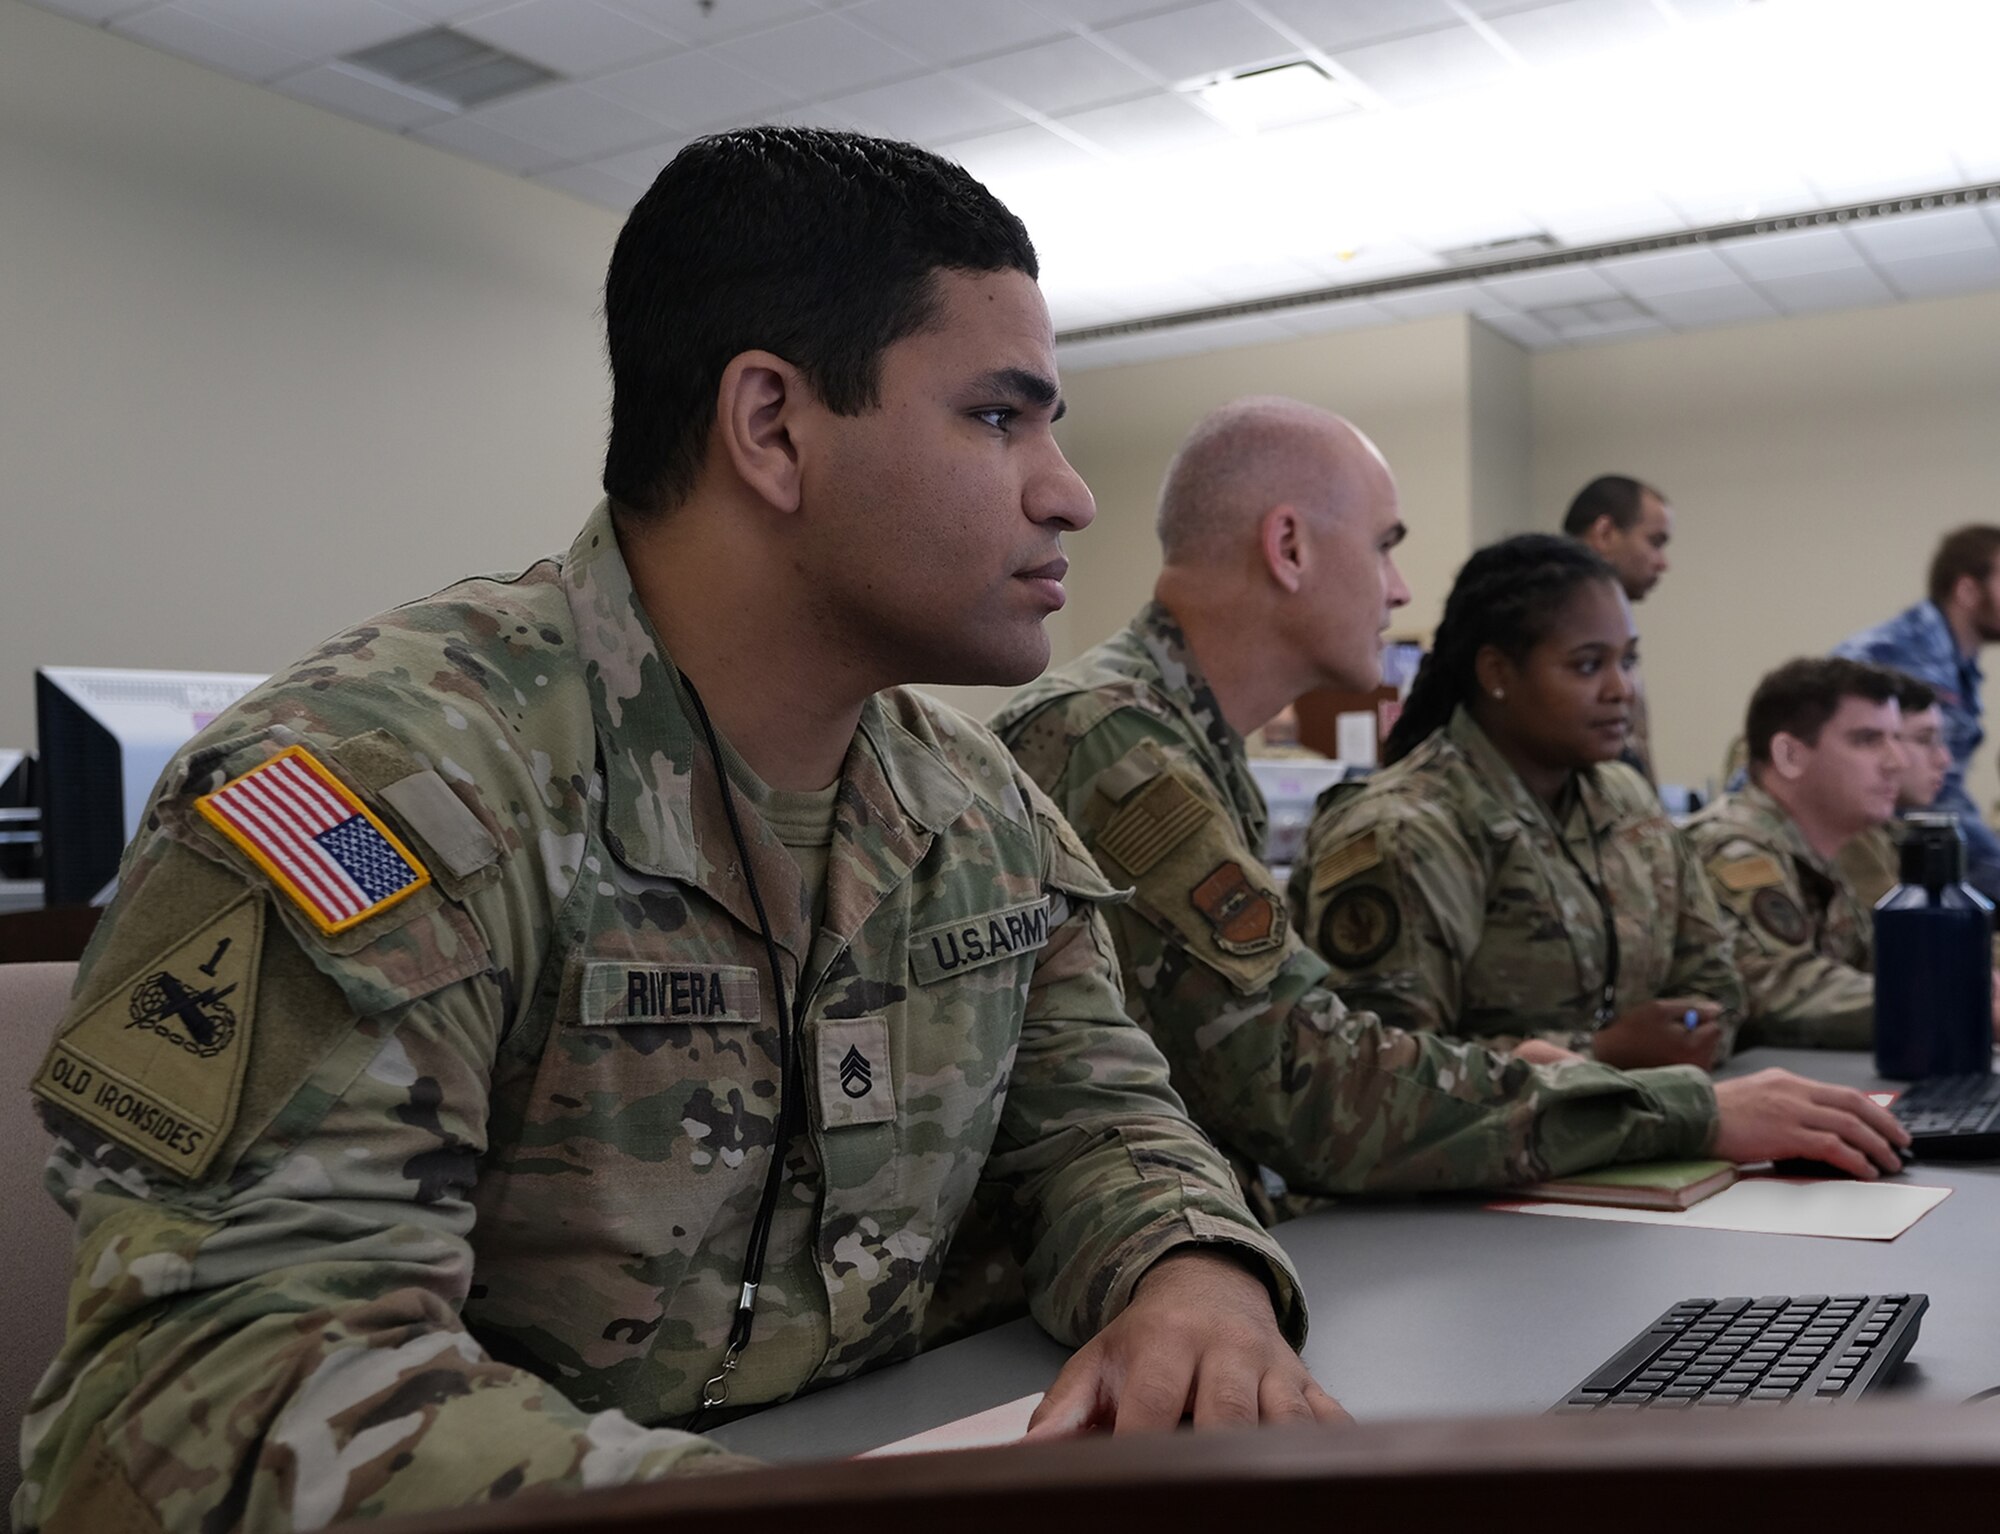 Uniformed US military personnel train at computers during the Air Operations Center Initial Qualification Training Course at Hurlburt Field, Florida.